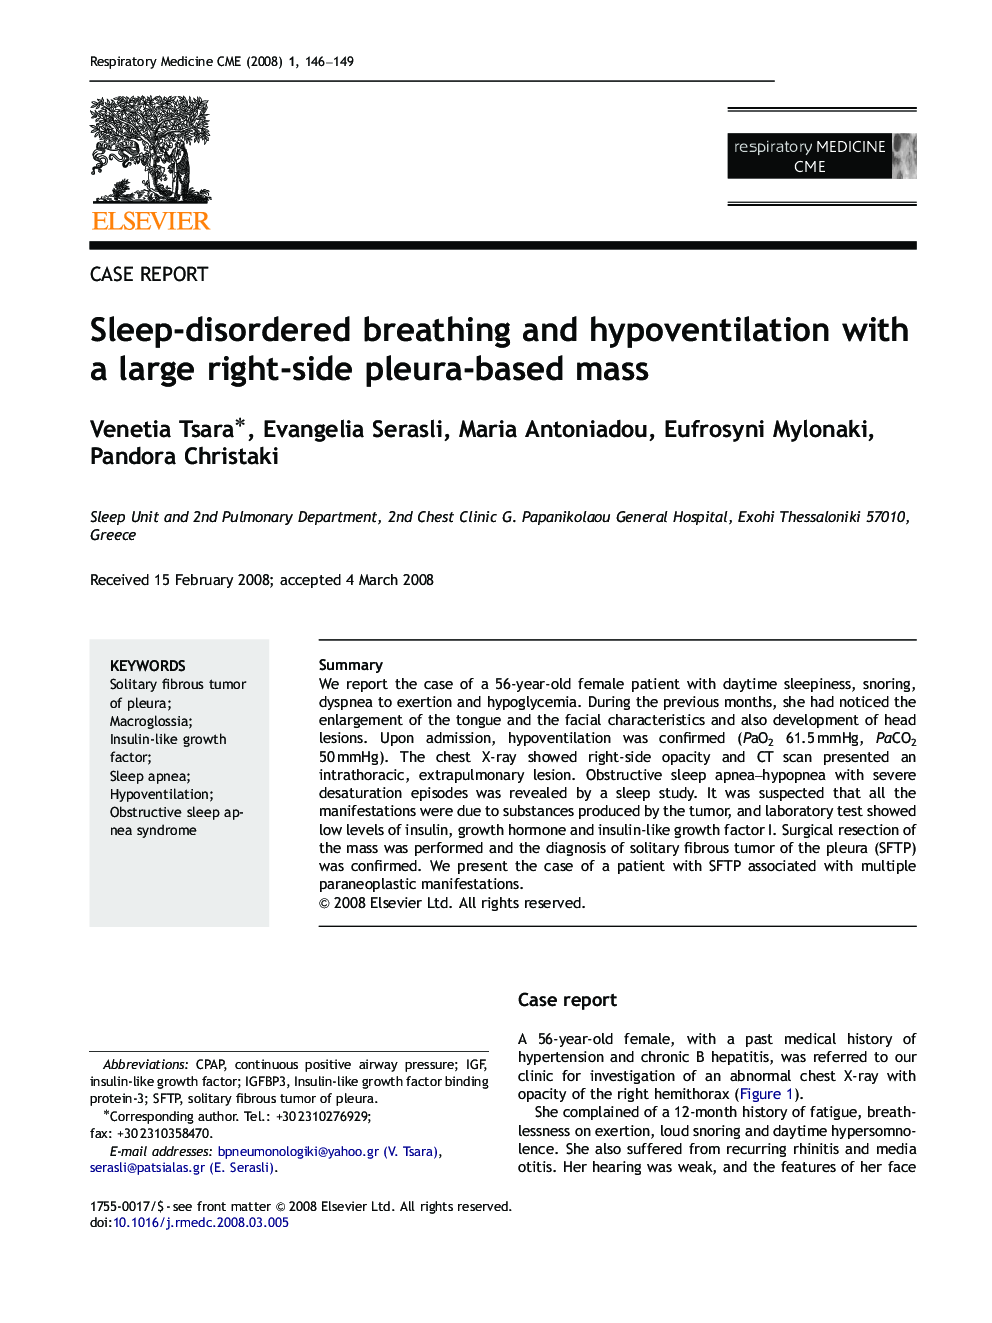 Sleep-disordered breathing and hypoventilation with a large right-side pleura-based mass